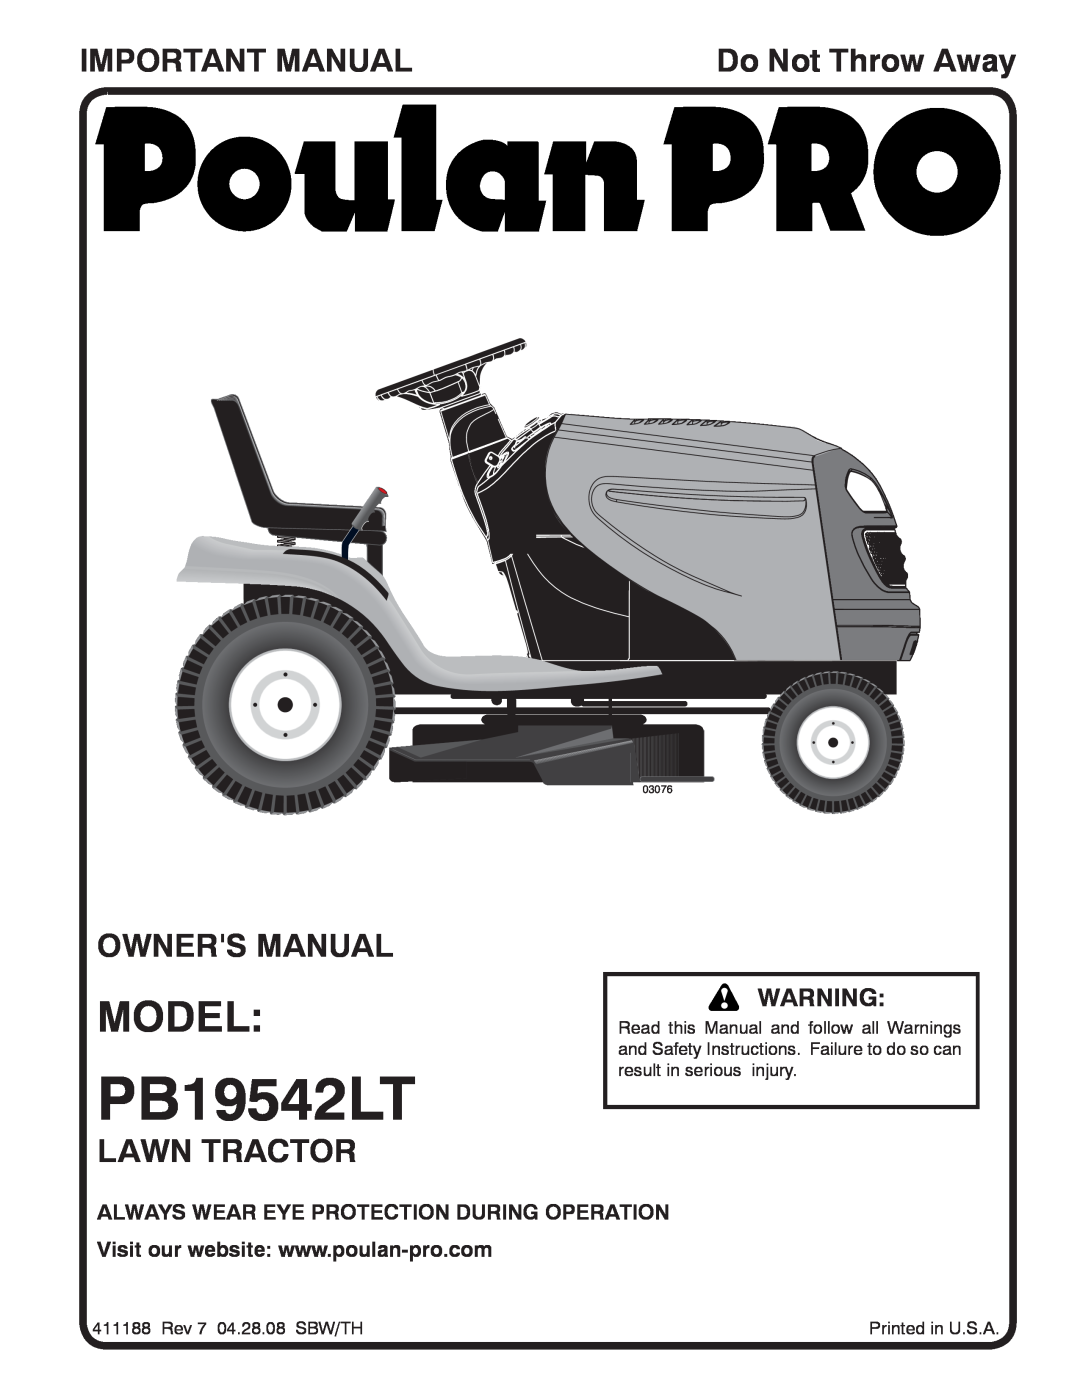 Poulan 96042002400 owner manual Model, Important Manual, Owners Manual, Lawn Tractor, PB19542LT, Do Not Throw Away 